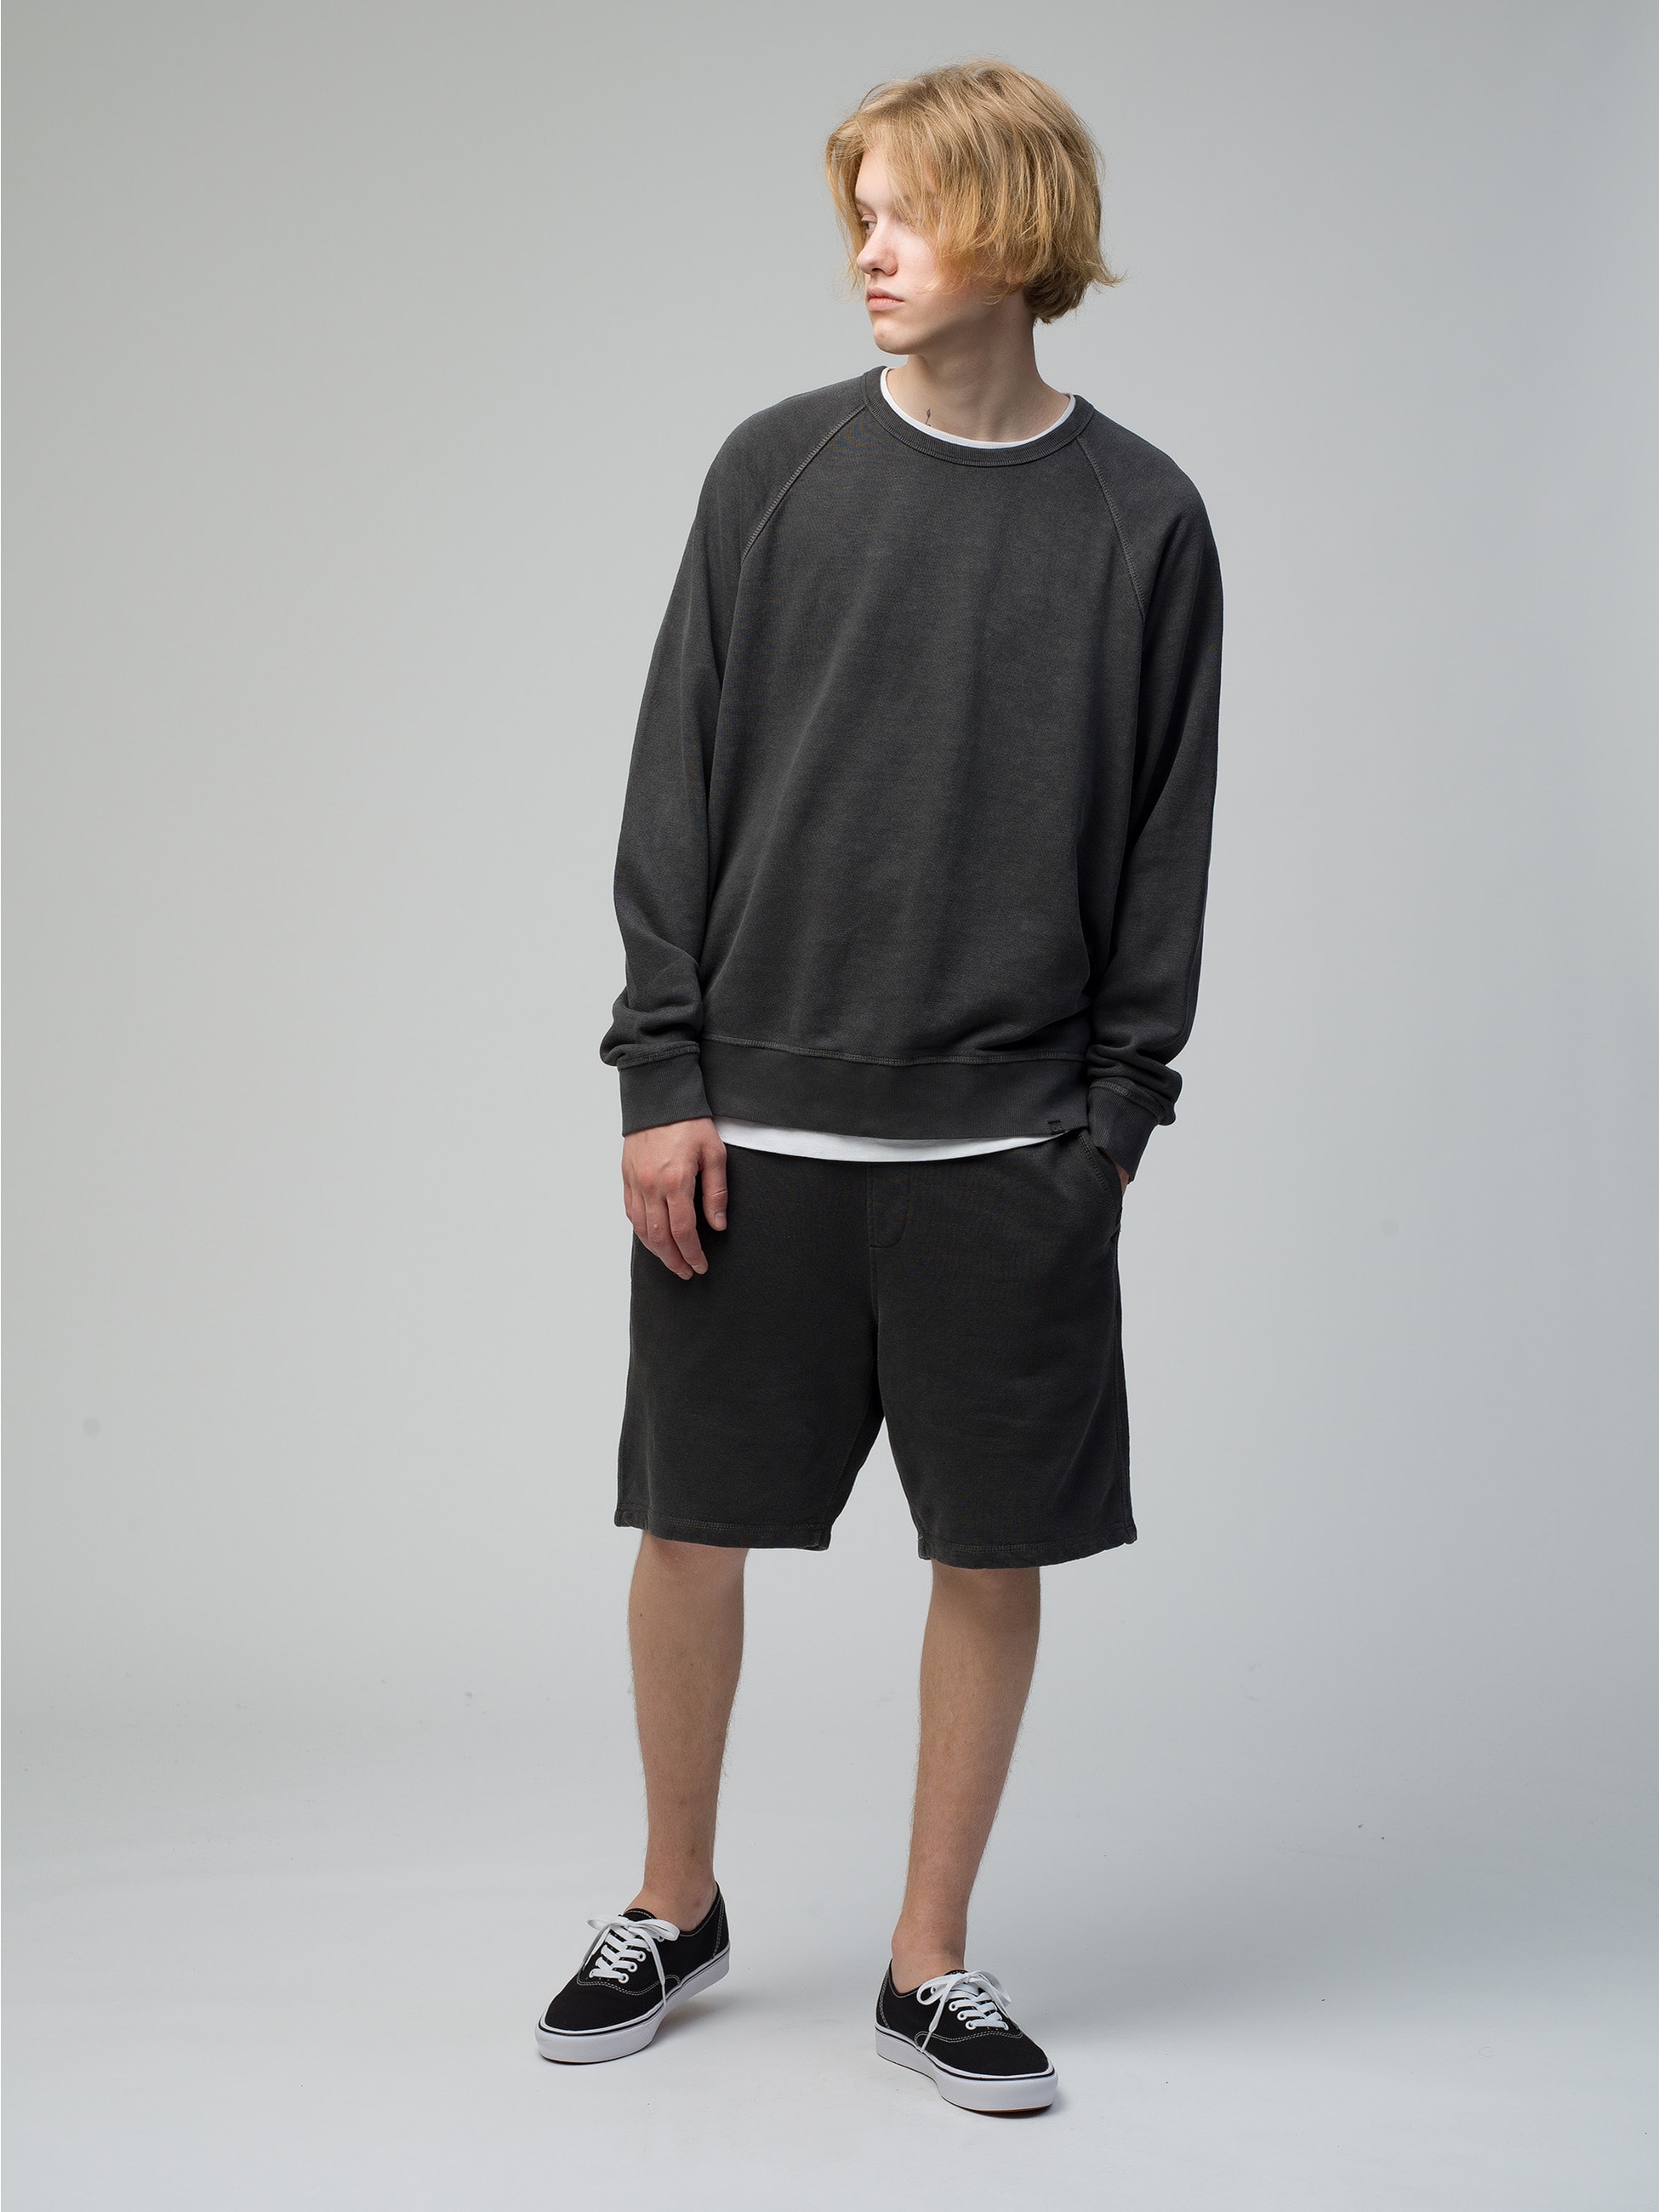 Sur Sweat Shorts (charcoal gray)｜OUTERKNOWN(アウターノウン)｜Ron